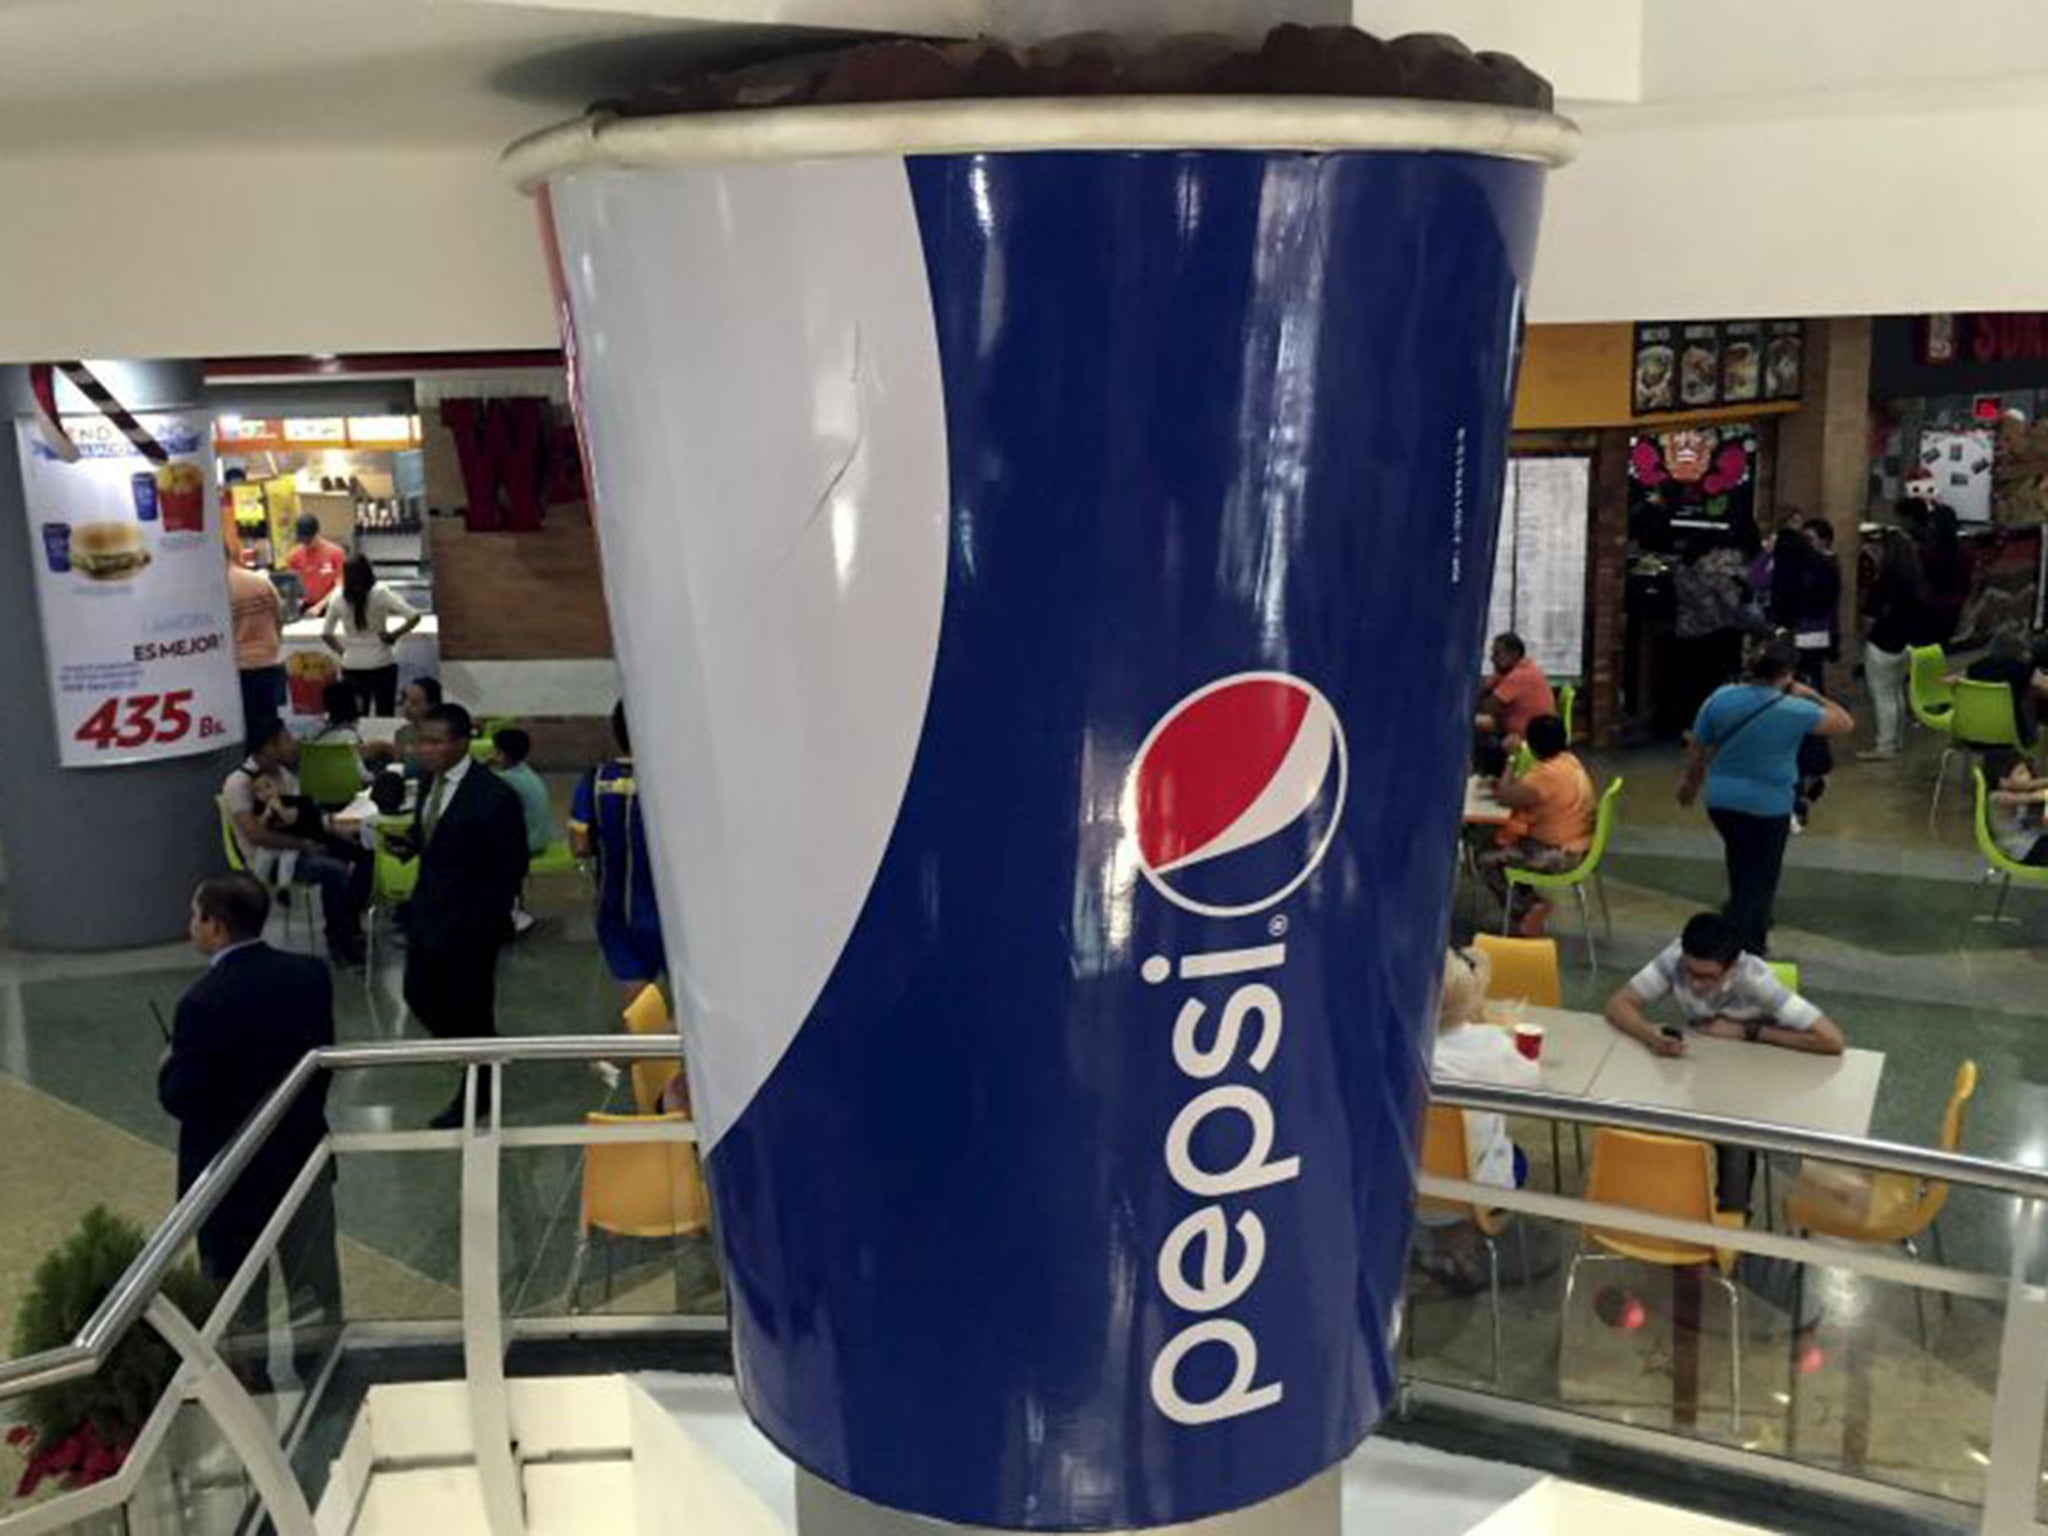 A mock giant cup of Pepsi at a shopping mall in the Venezuelan capital of Caracas on 20 December 2015